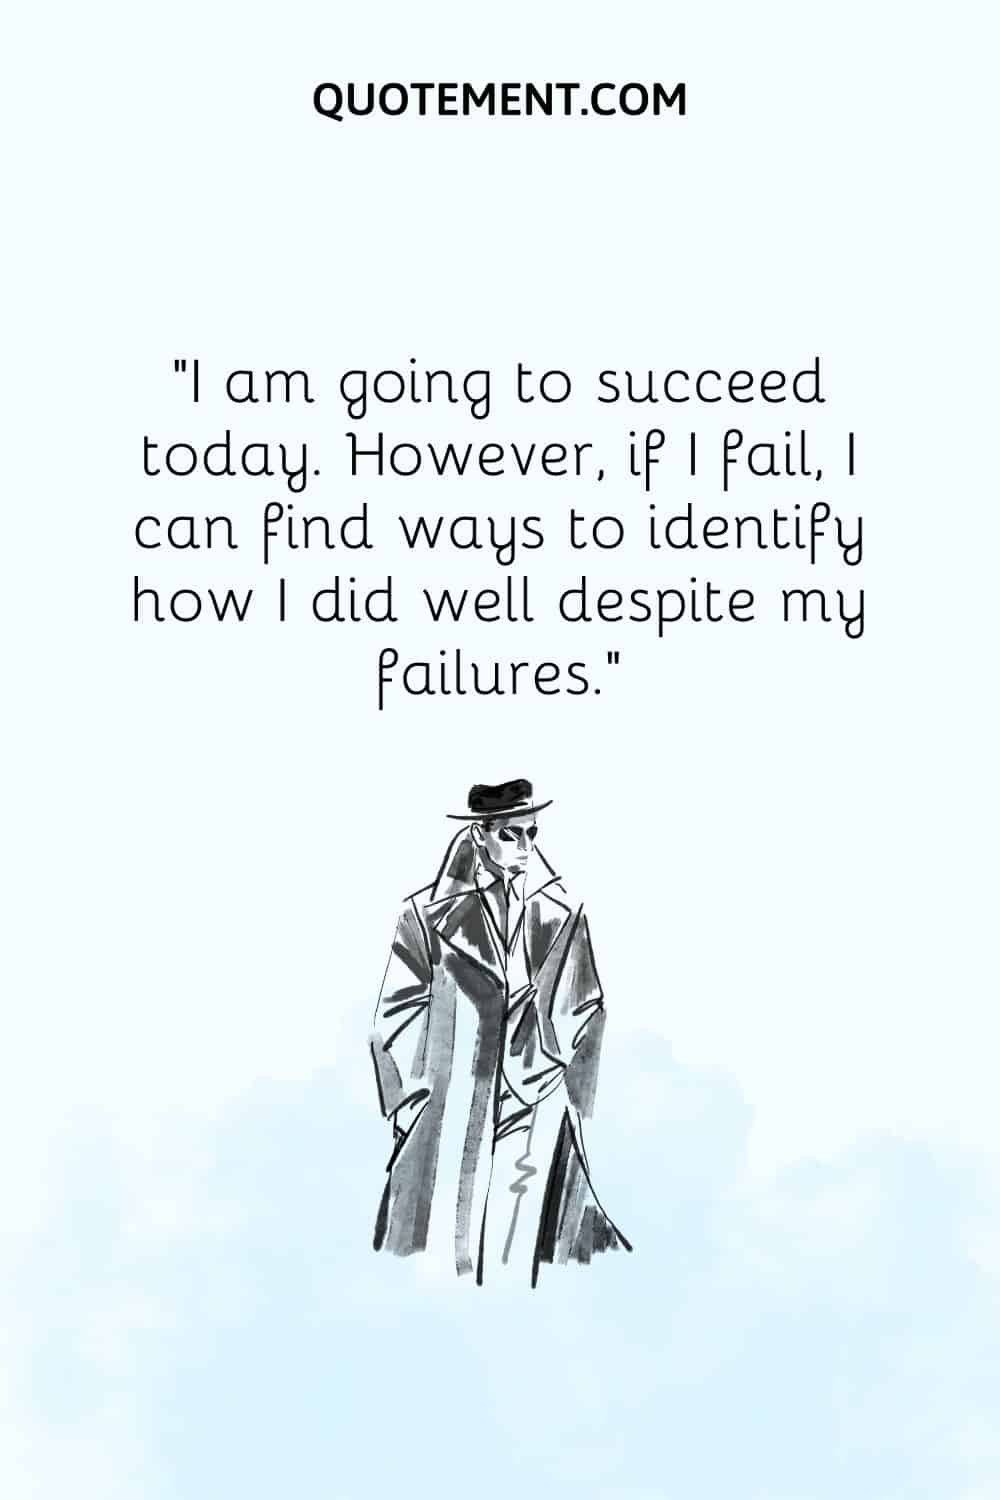 I am going to succeed today